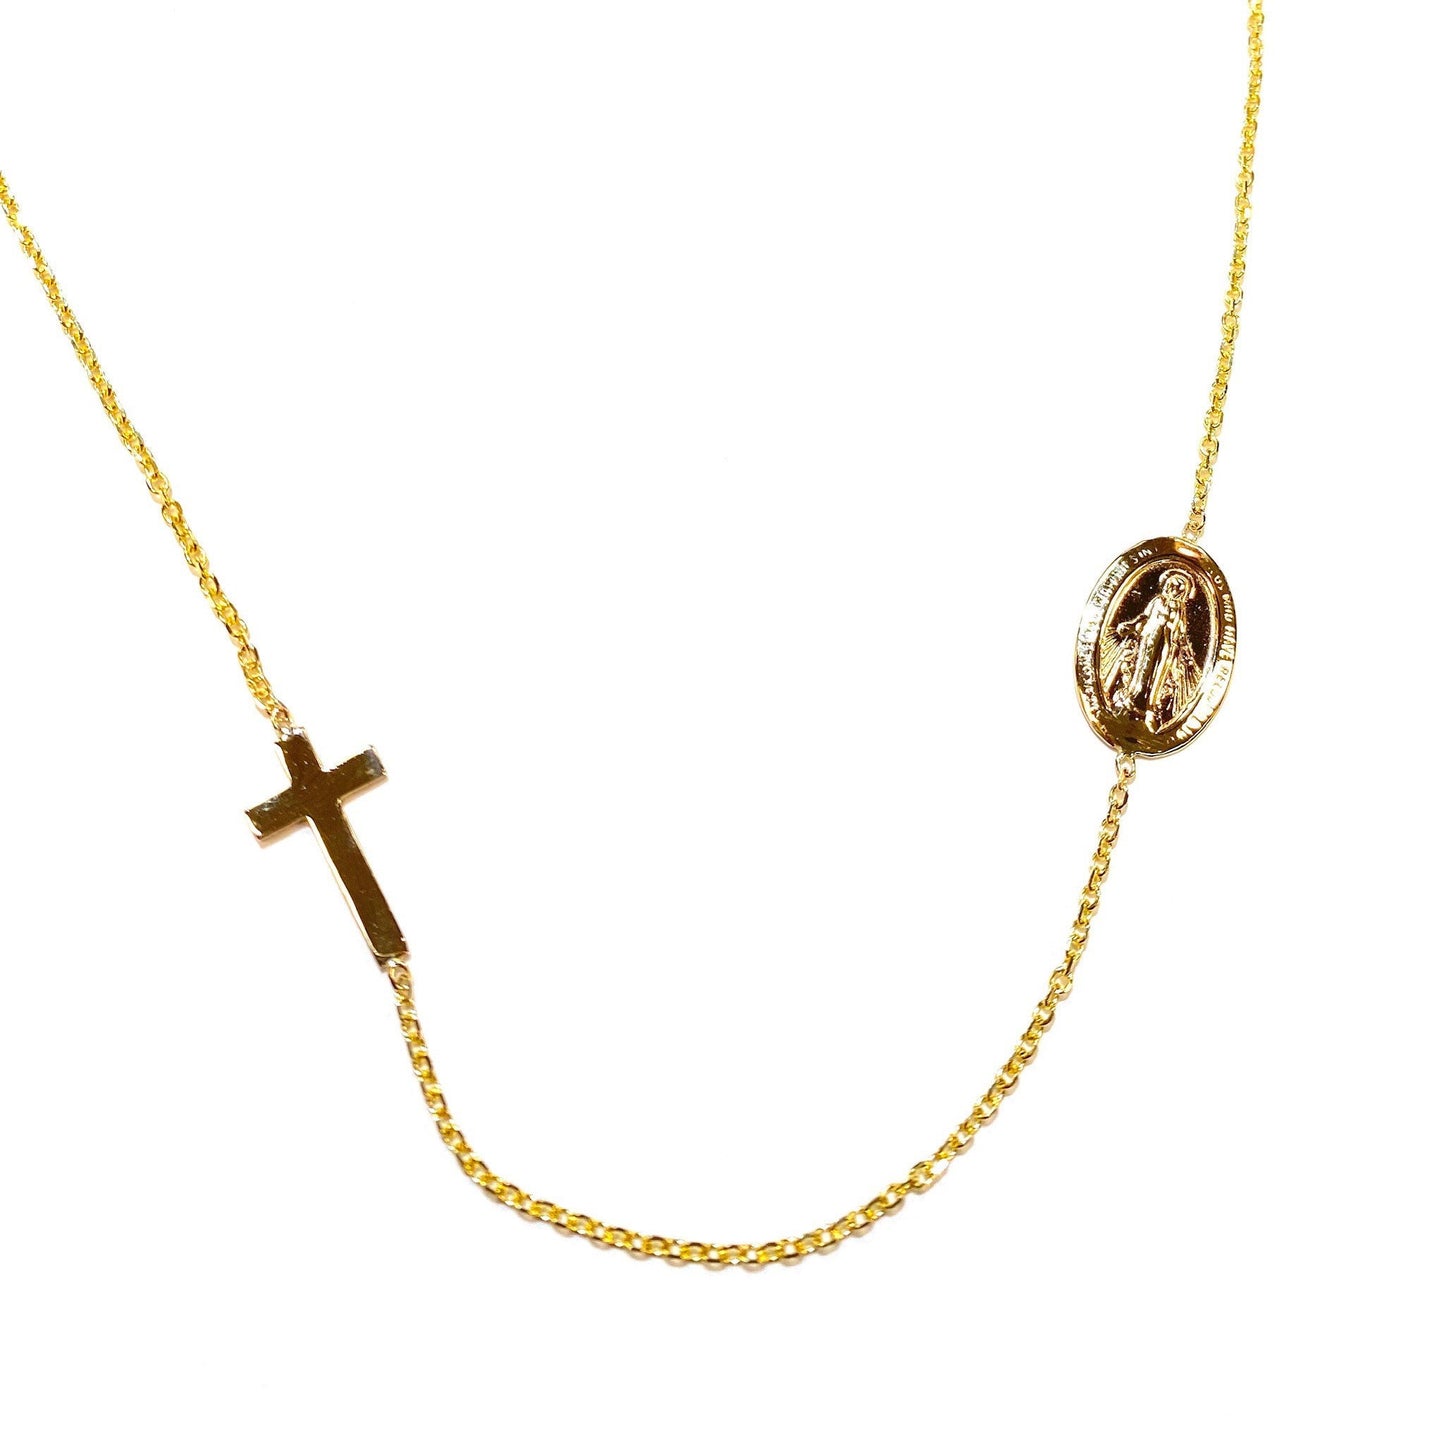 Virgin Mary and Cross Necklace